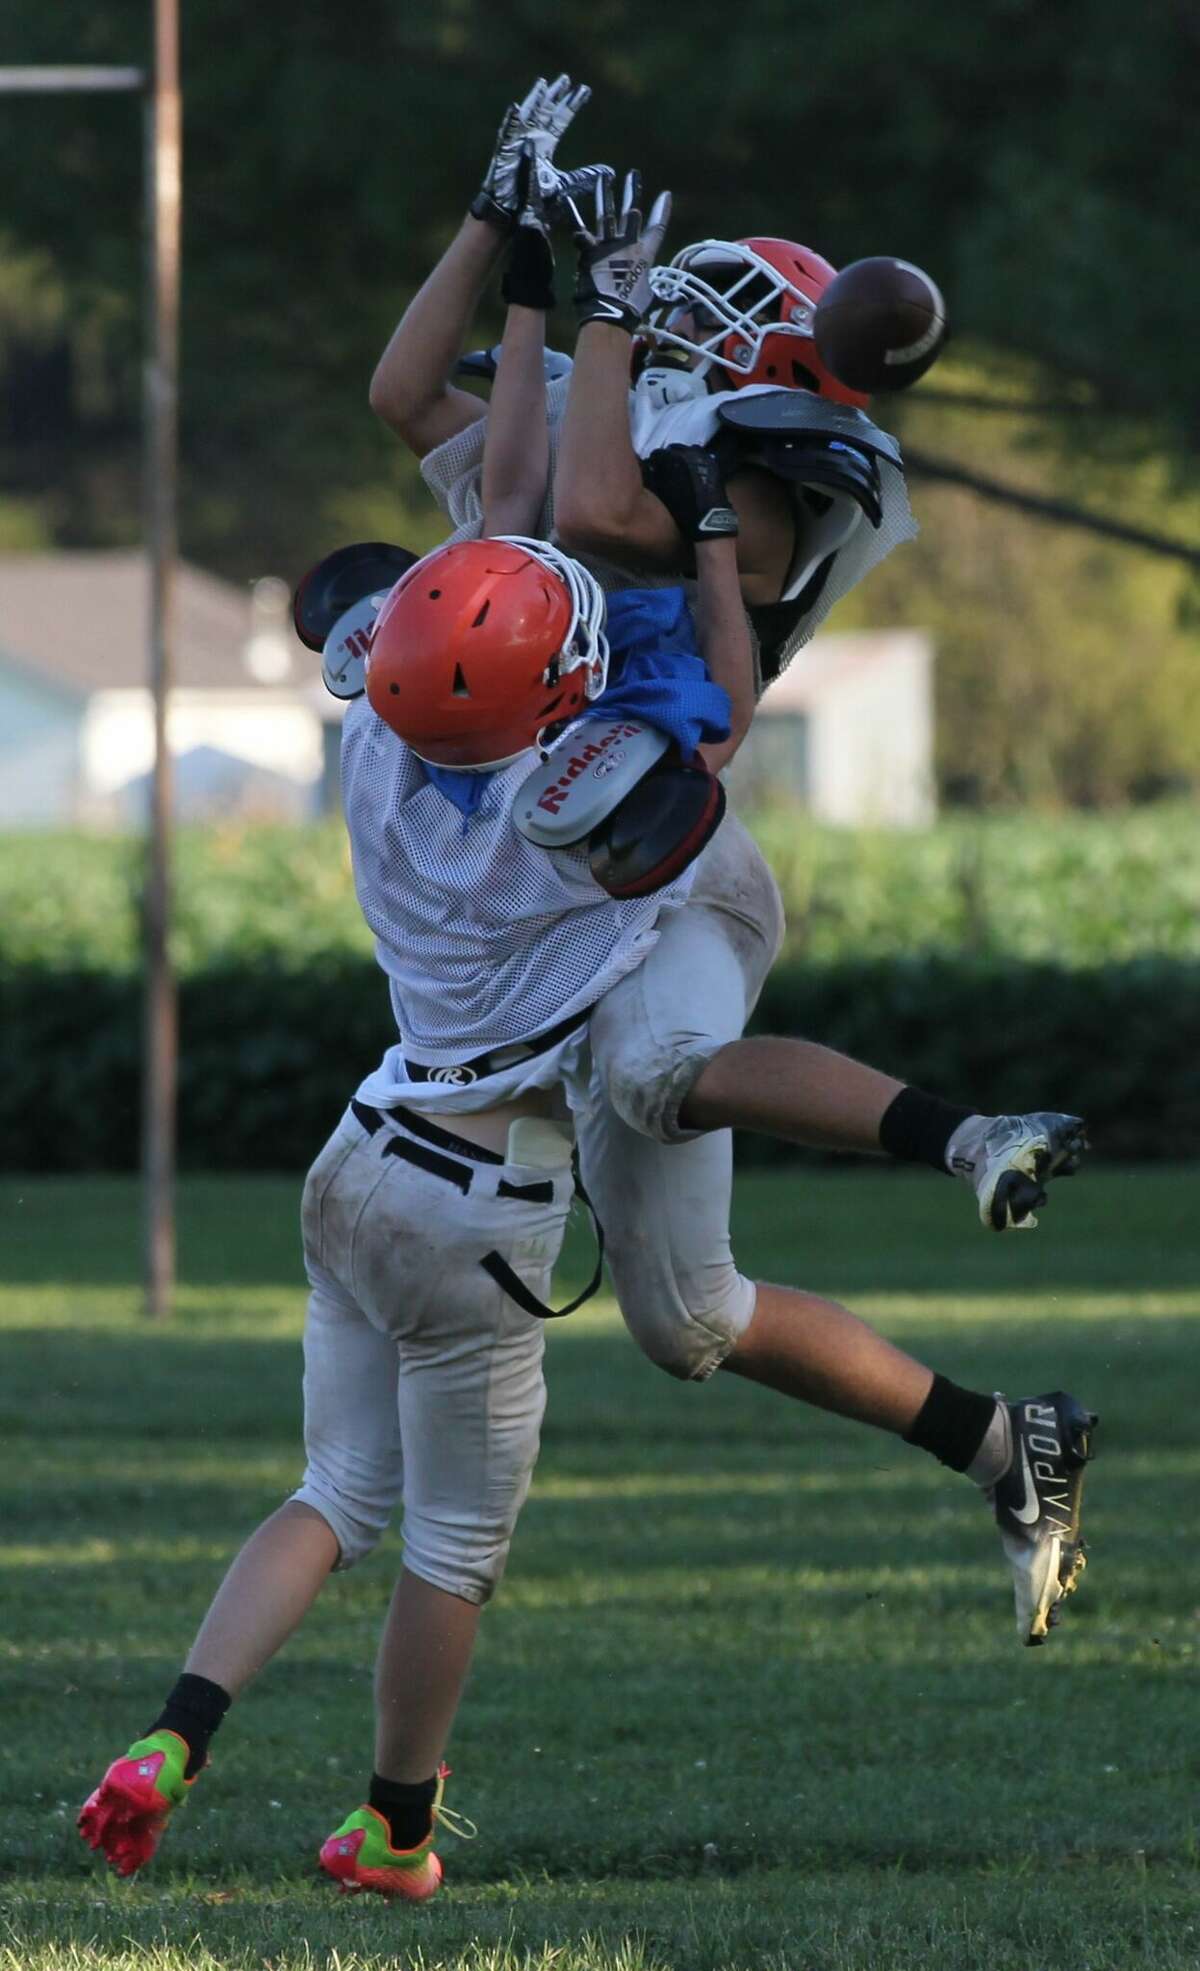 A Greenfield-Northwestern defender bats the ball away on a pass play during football practice earlier this week.